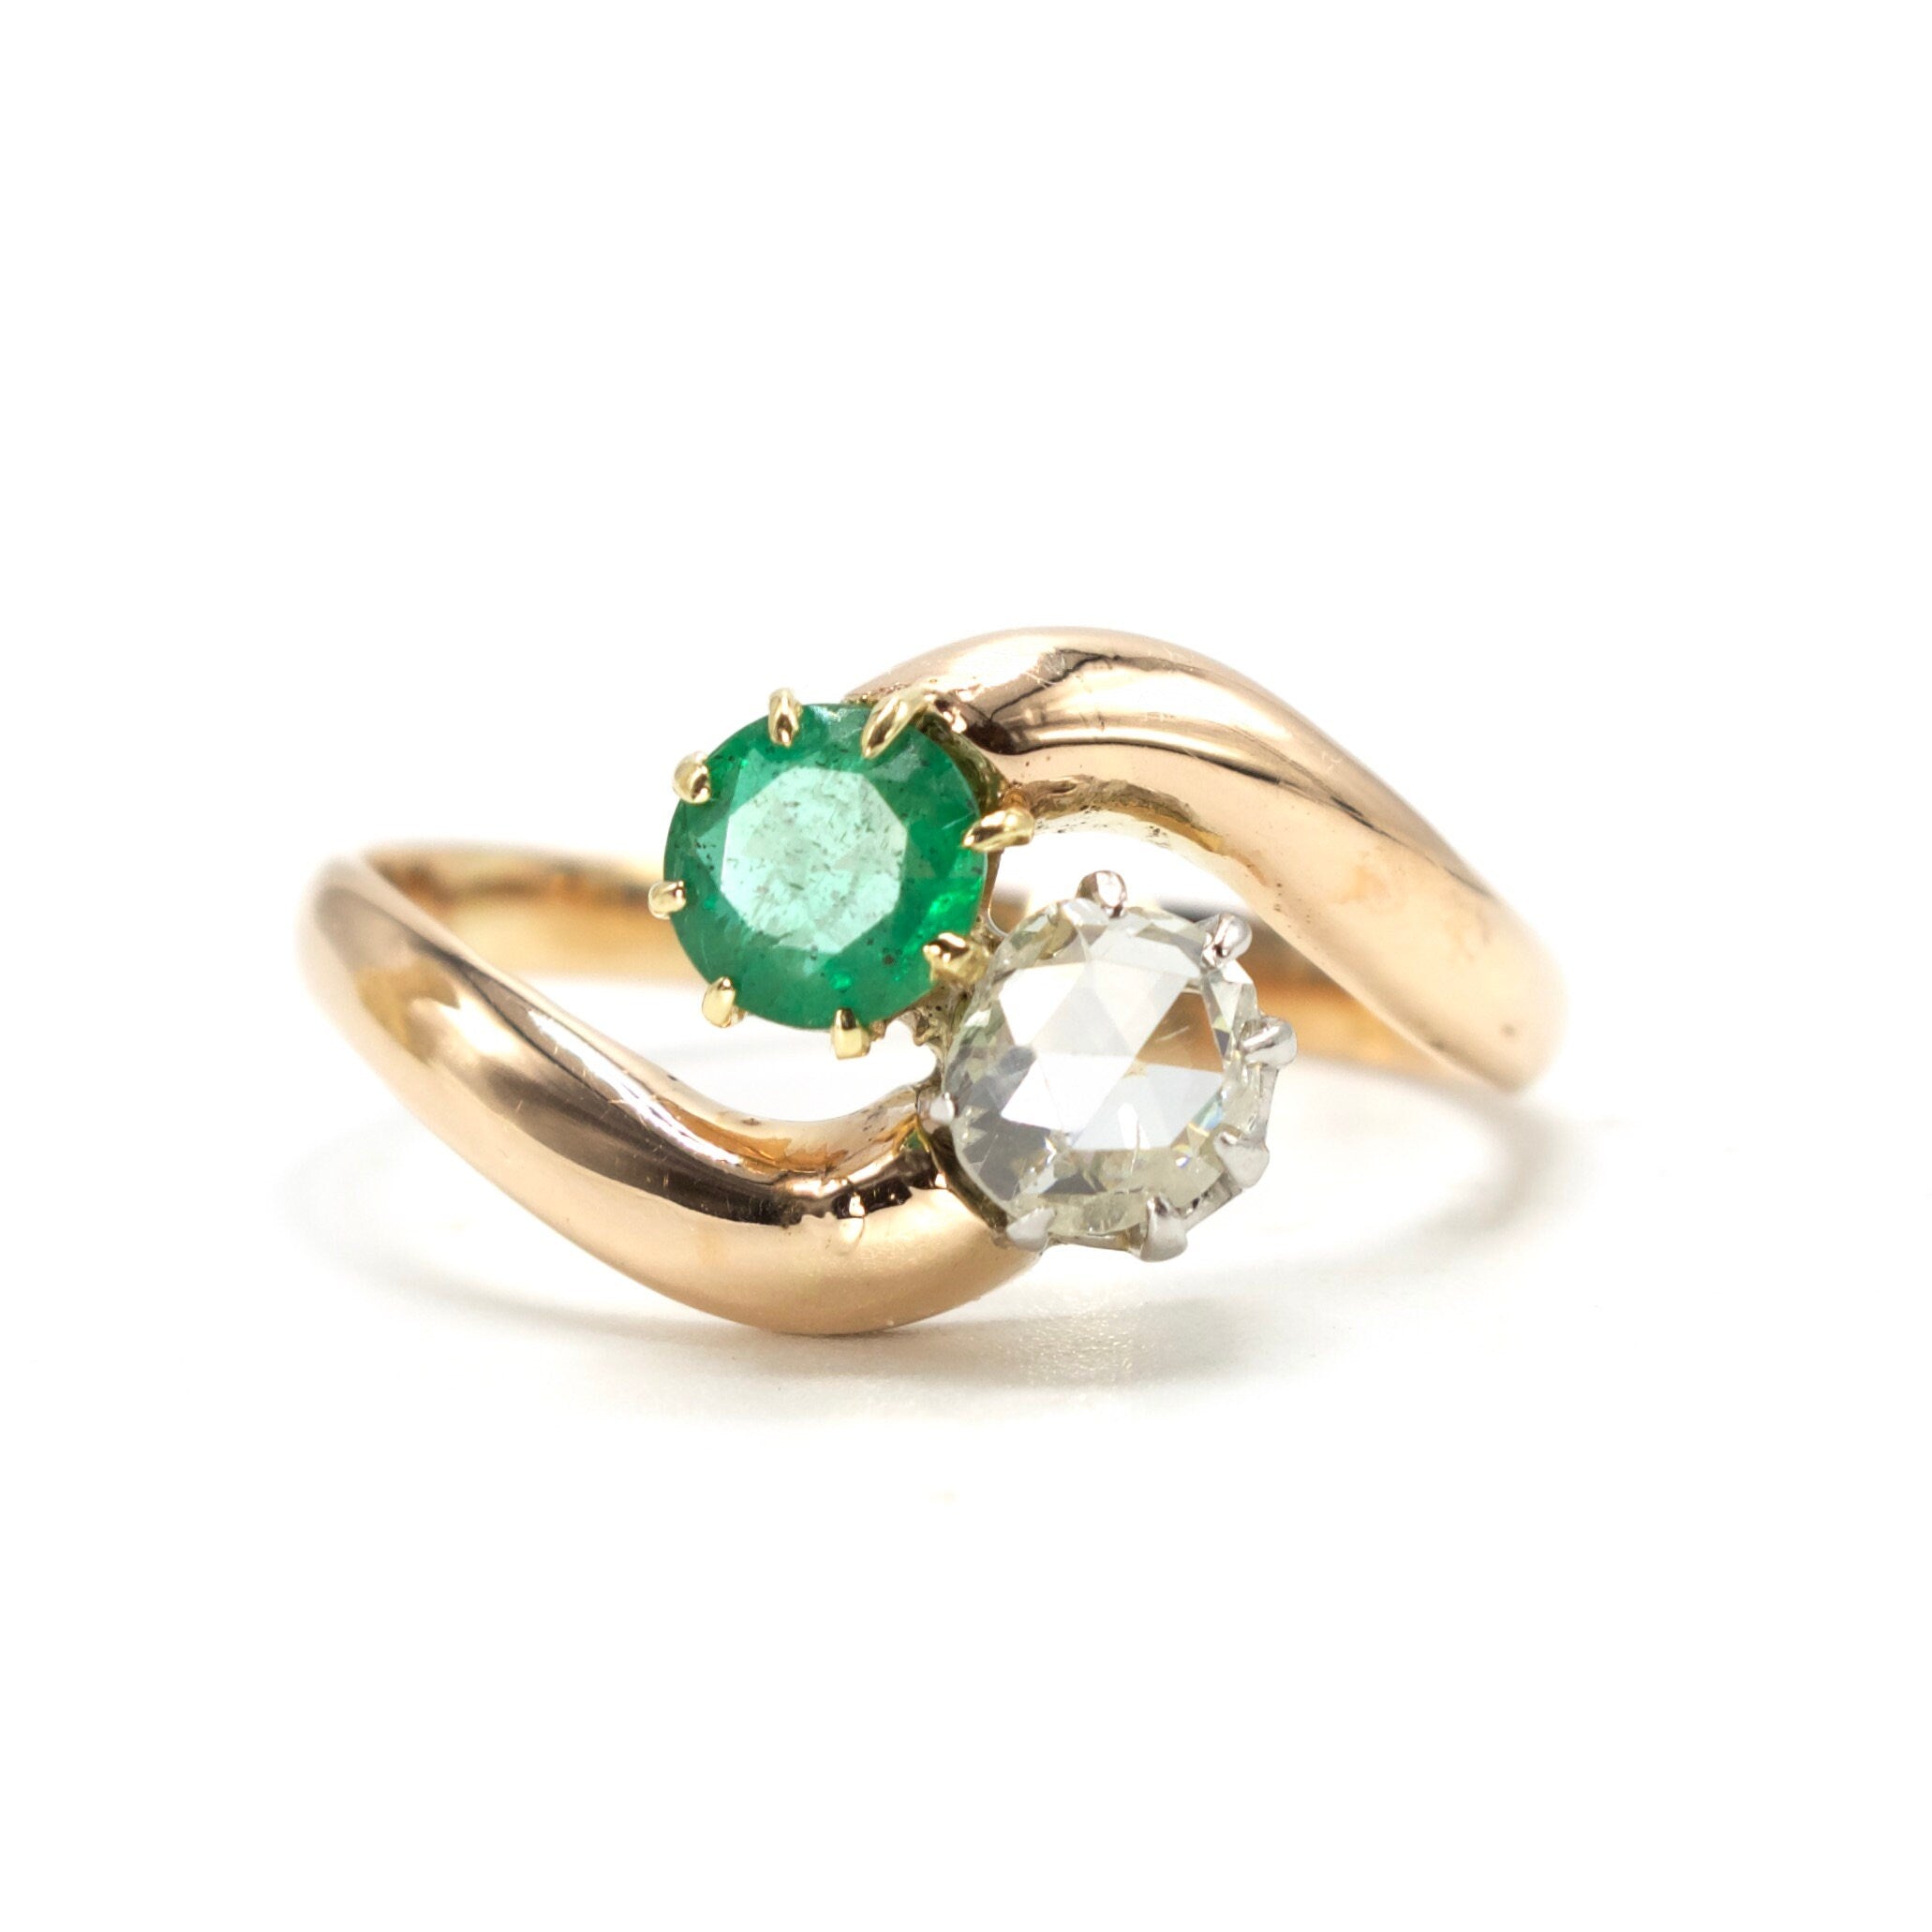 Victorian Rose Cut Diamond and Emerald Bypass Ring in Gold (ca. 1900)